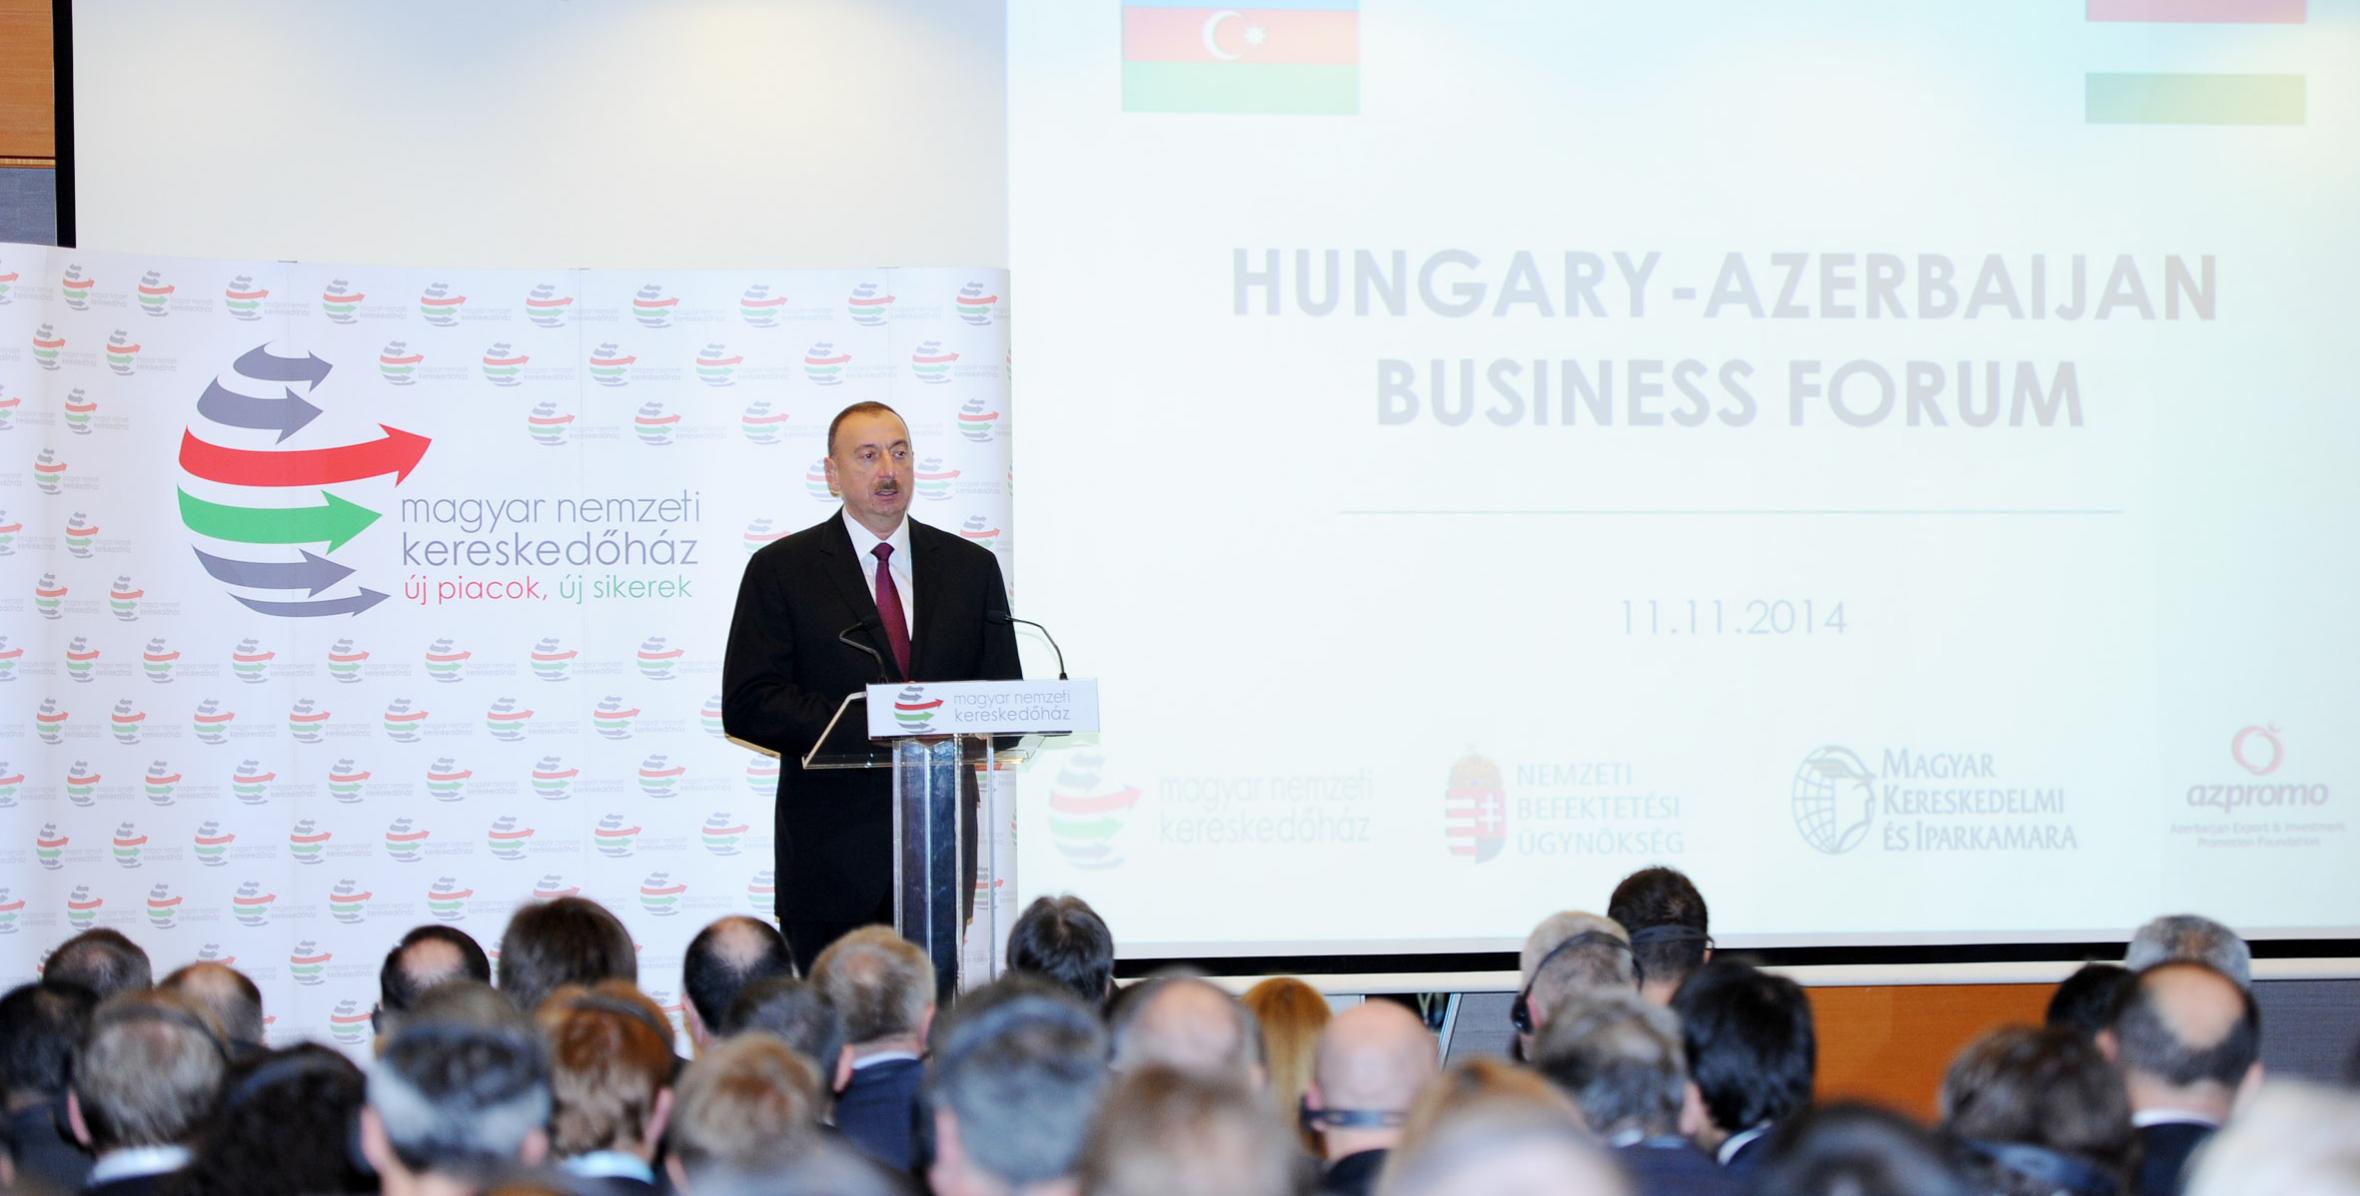 Ilham Aliyev and Hungarian Prime Minister Viktor Orban attended the Hungarian-Azerbaijani business forum